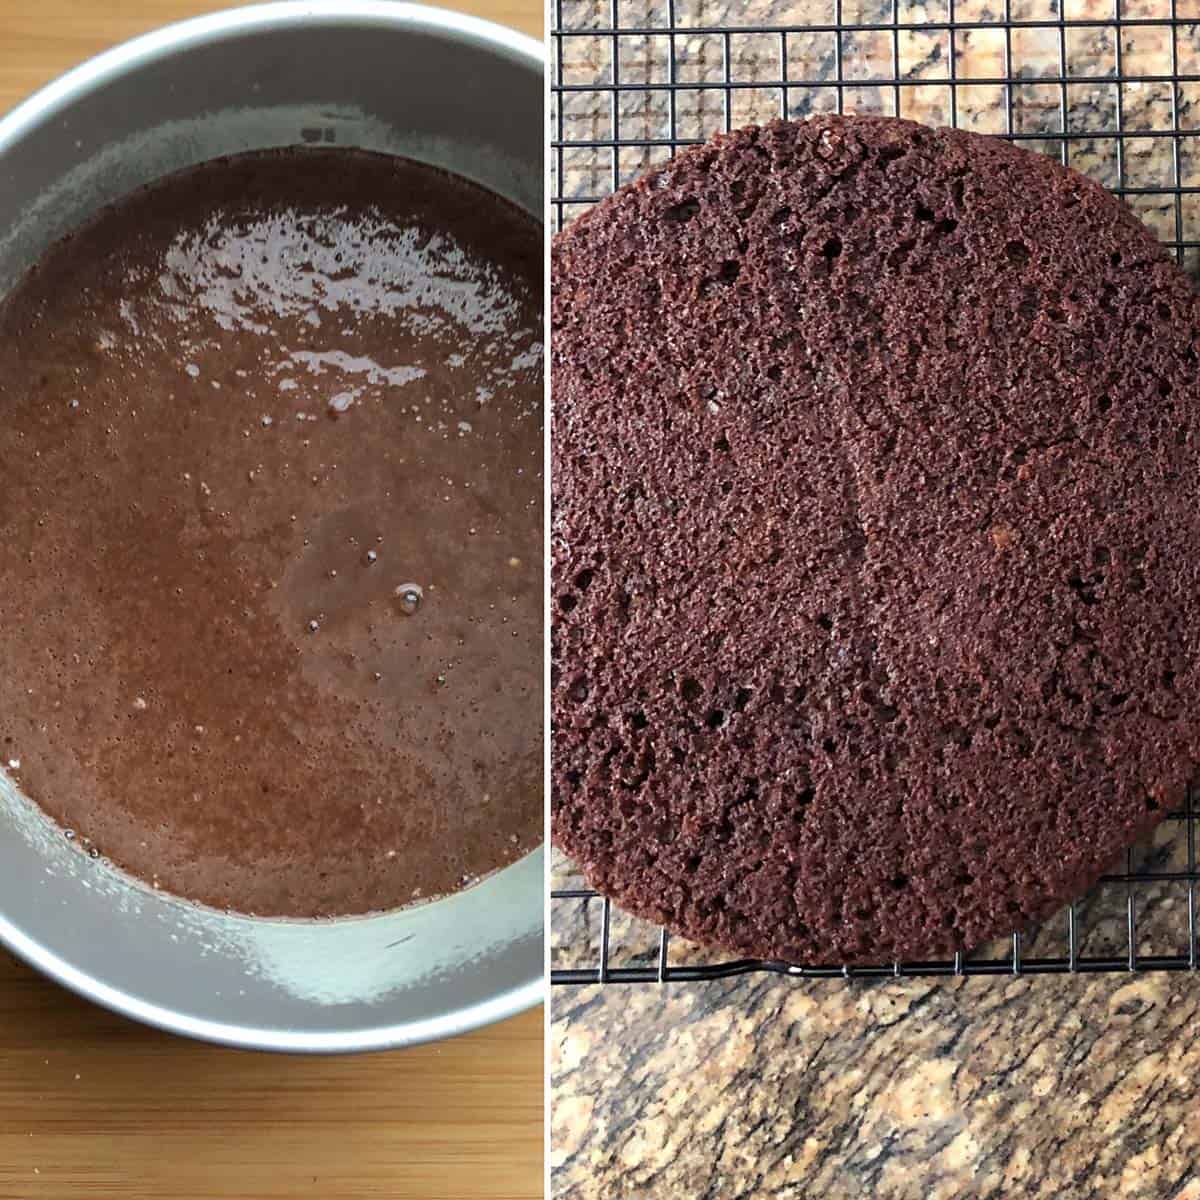 Side by side photos showing batter in cake pan and baked cake